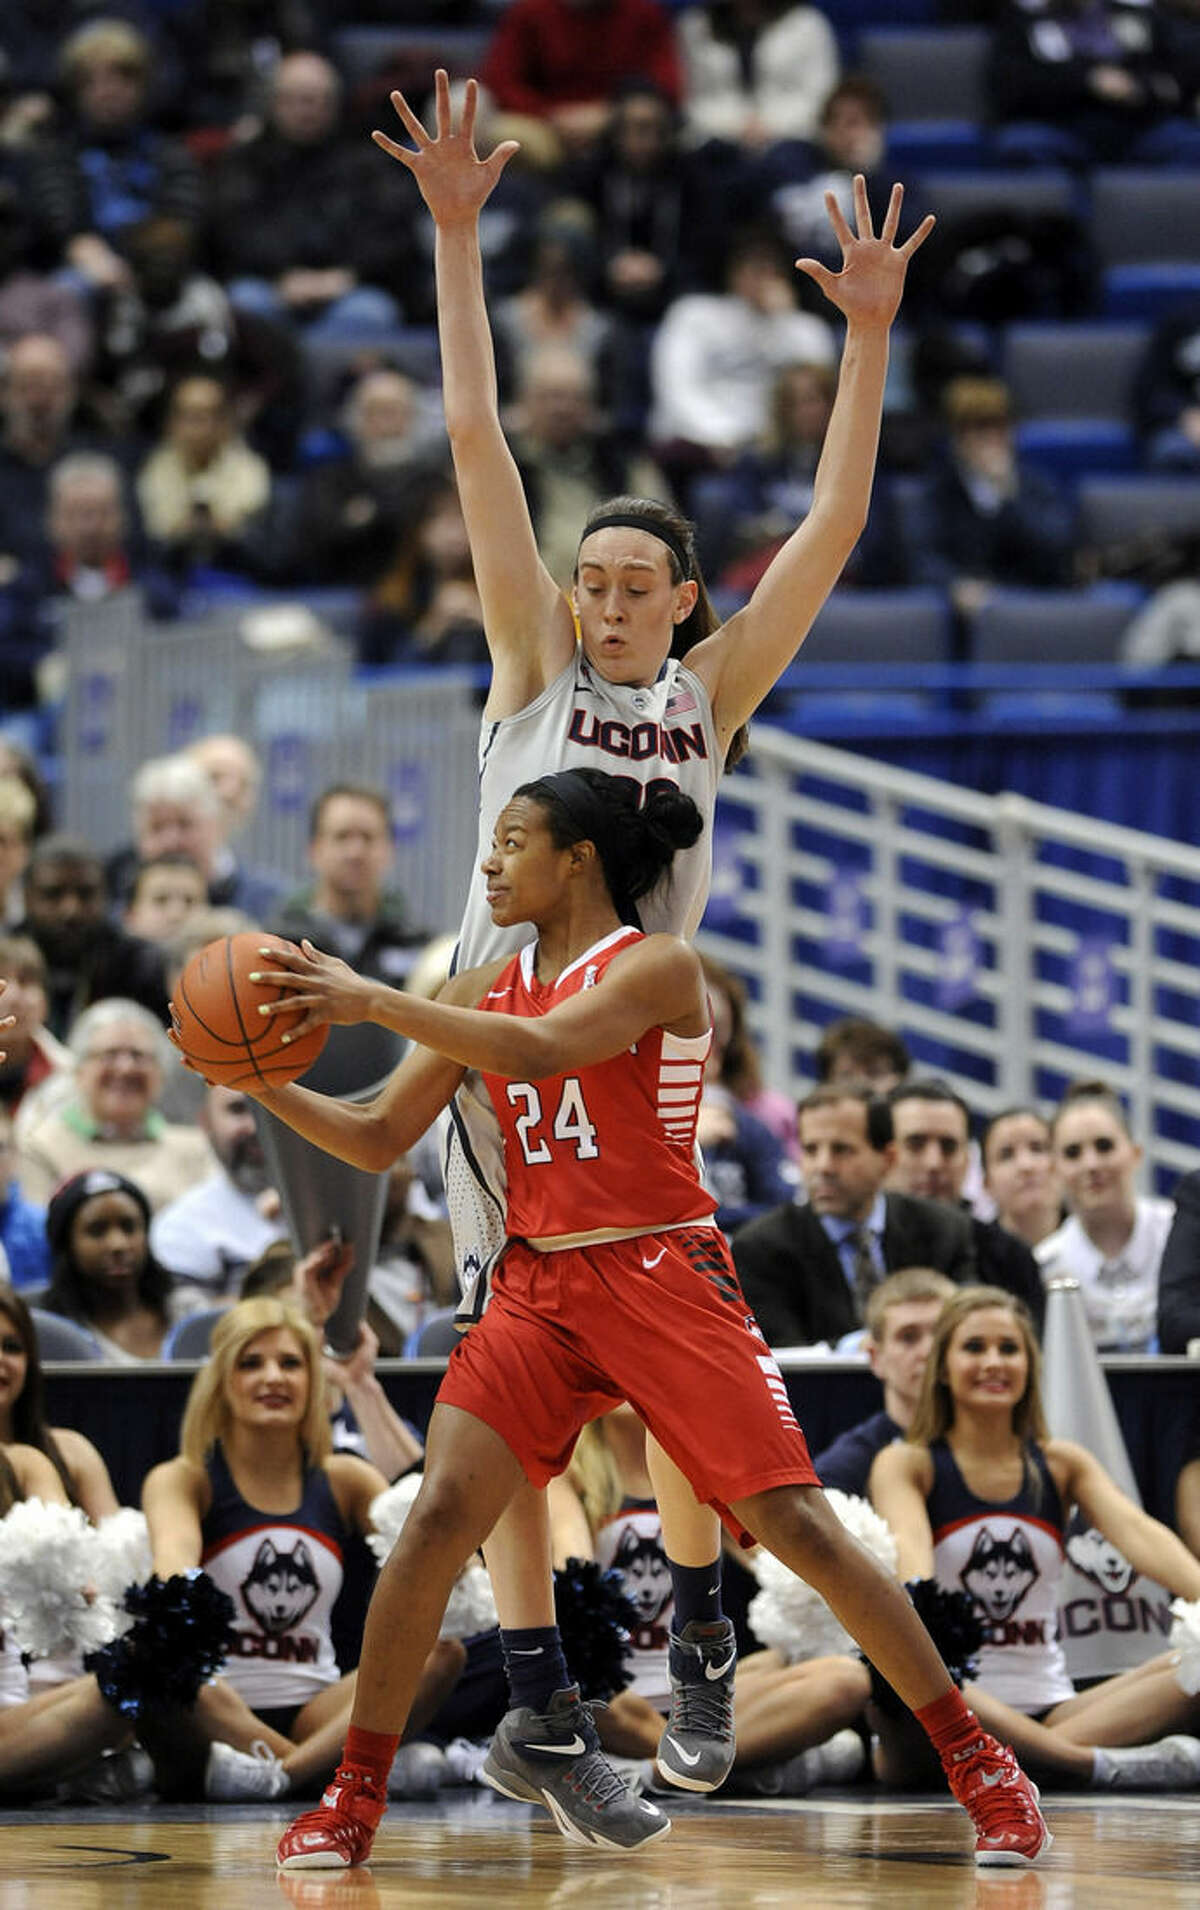 Connecticut's Breanna Stewart (30) guards Houston's Mariah Mitchell (24) during the first half of an NCAA college basketball game in Hartford, Conn., on Tuesday, Feb. 17, 2015. (AP Photo/Fred Beckham)